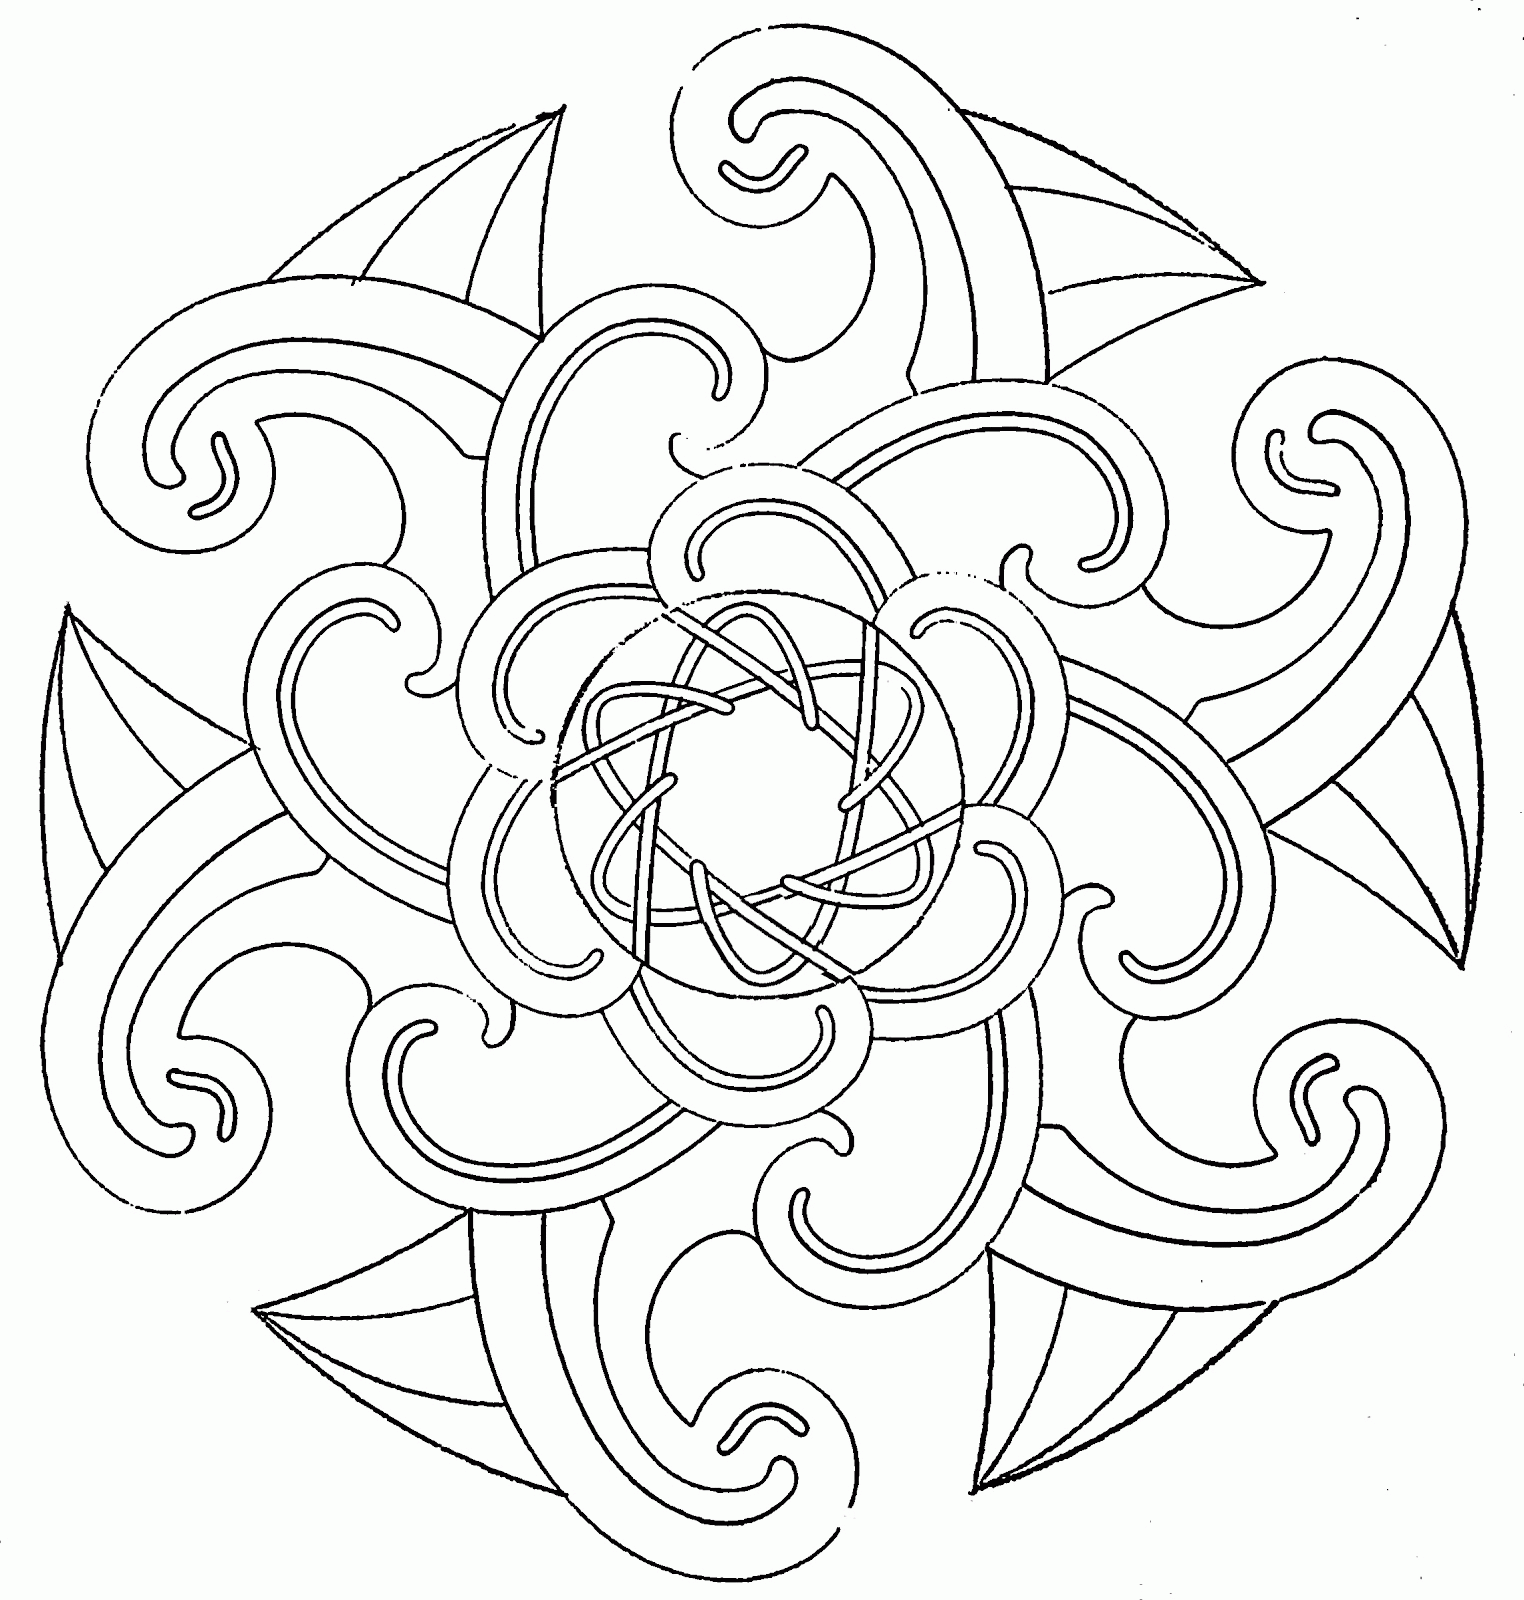 cool coloring pictures graffiti coloring pages to download and print for free cool coloring pictures 